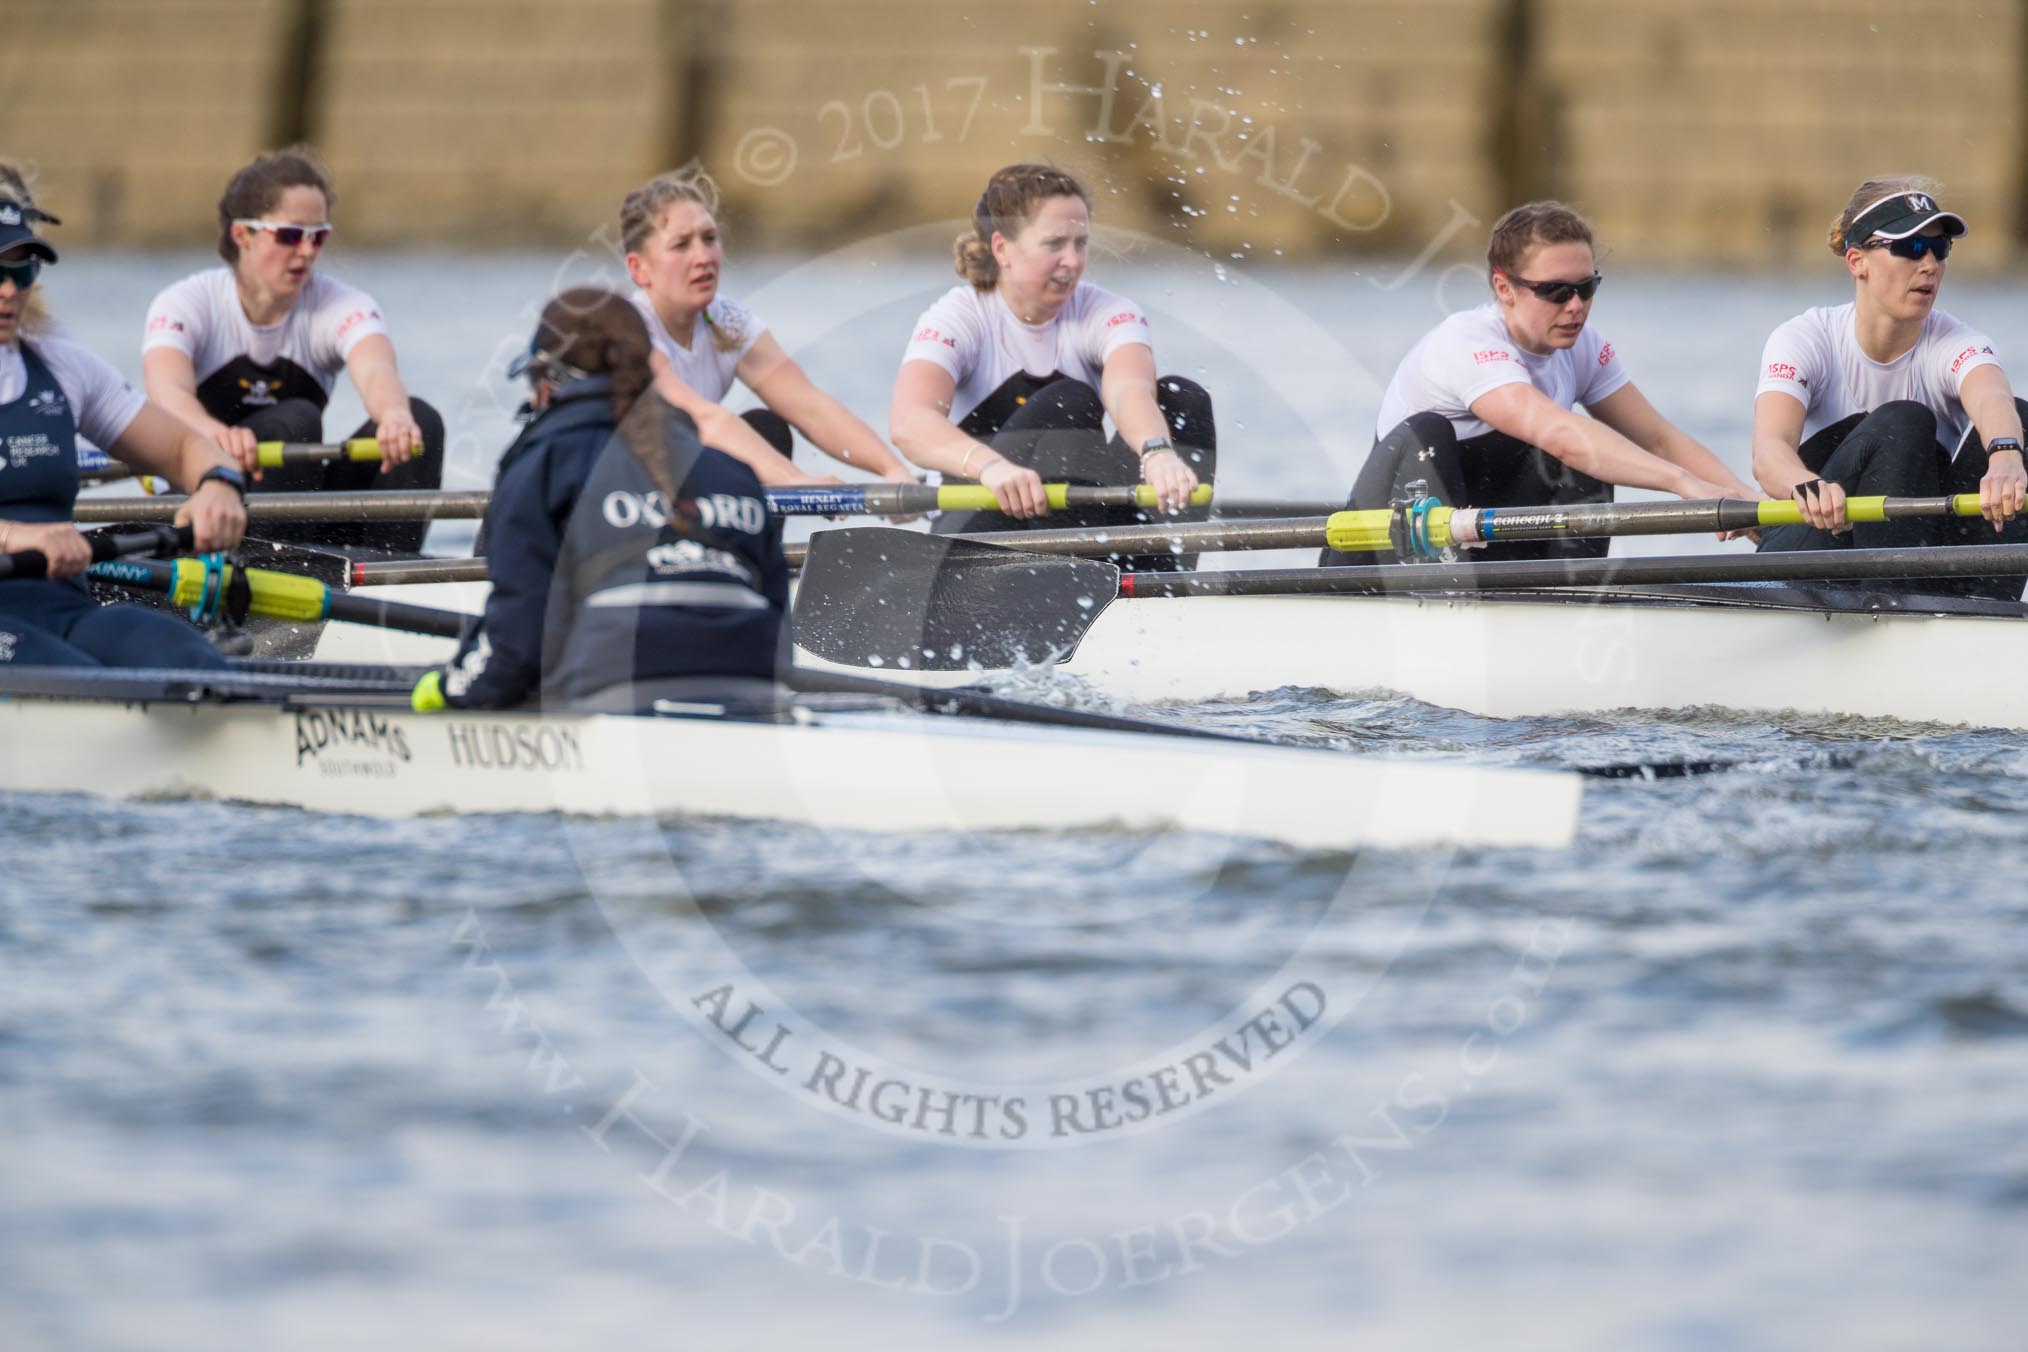 The Cancer Research UK Boat Race season 2017 - Women's Boat Race Fixture OUWBC vs Molesey BC: OUWBC with a lead of around half a length in the milepost area.
River Thames between Putney Bridge and Mortlake,
London SW15,

United Kingdom,
on 19 March 2017 at 16:03, image #65